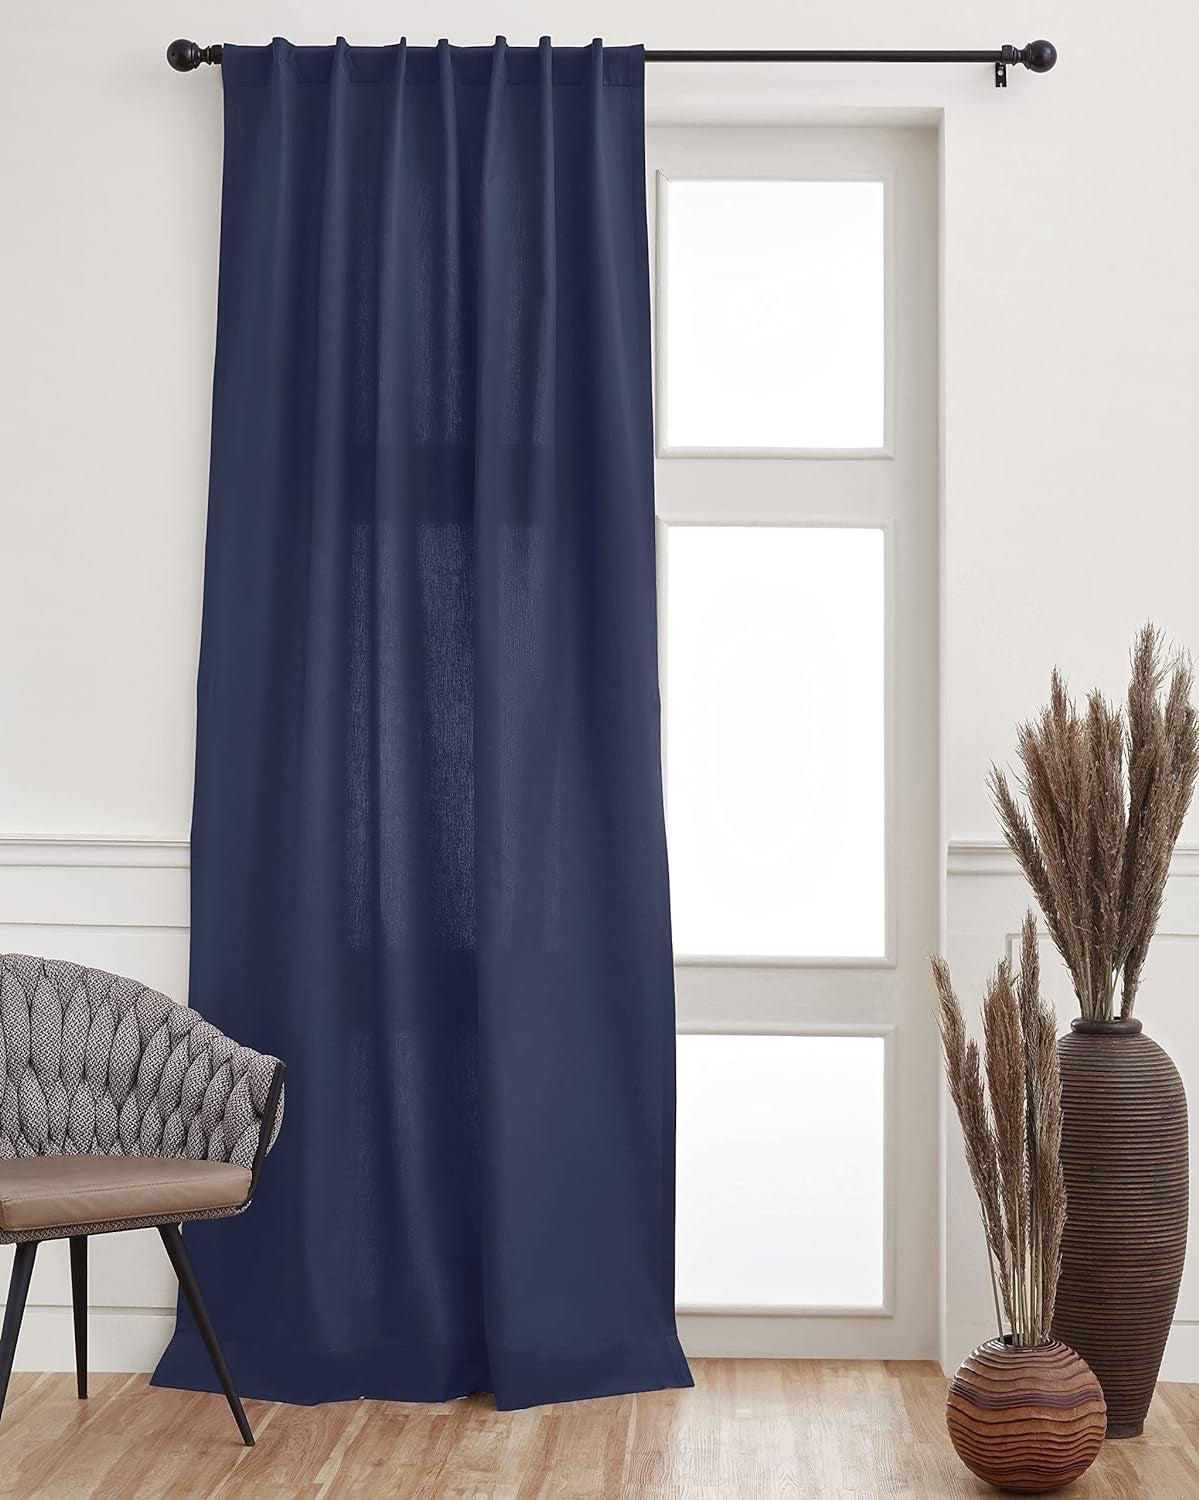 Solino Home Cotton Linen Curtain Ivory – 52 X 54 Inch Curtain with Rod Pocket and Hidden Tab – 2 in 1 Hanging Style Curtain for Living Room, Indoor, Outdoor  Solino Home Navy 52 X 144 Inch 